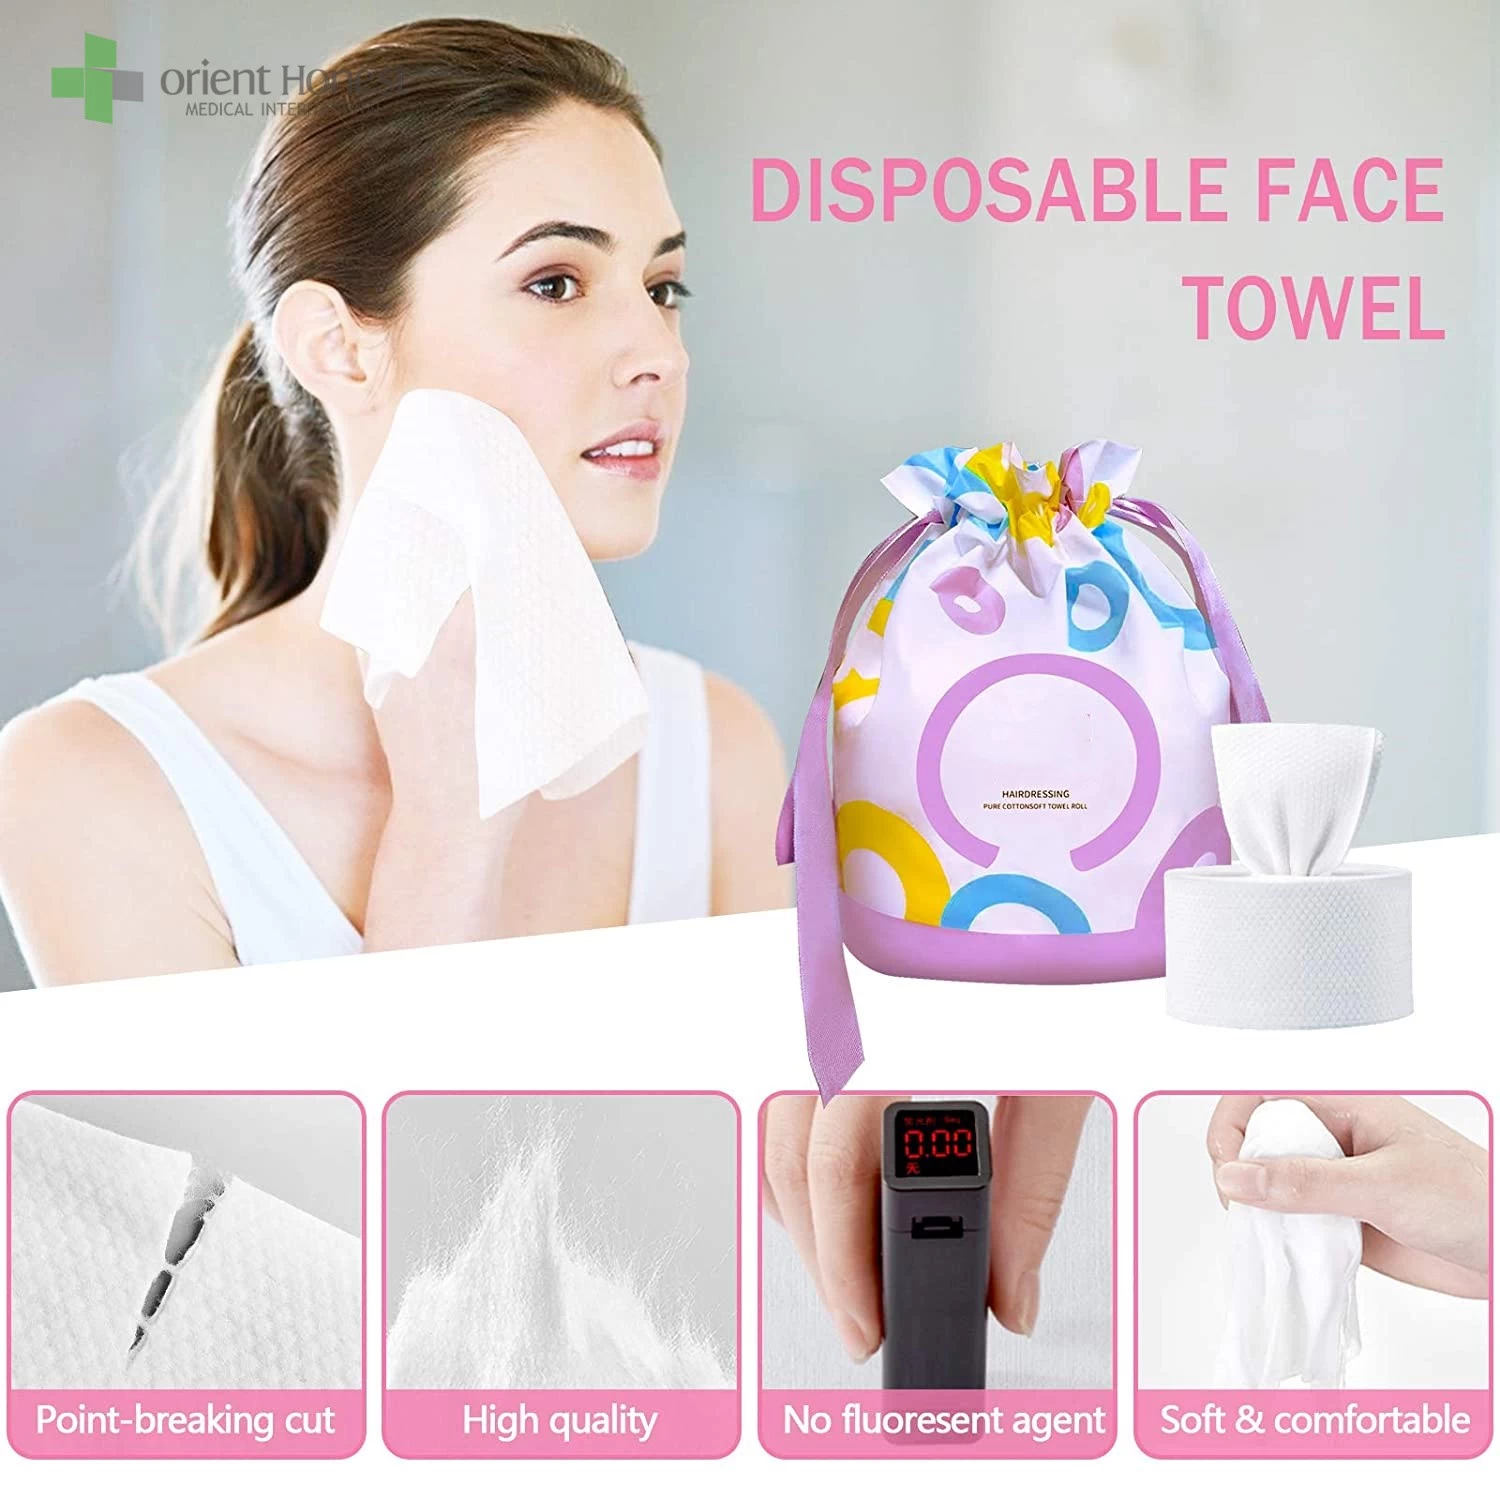 dry and wet use cleaning skincare clean face cotton tissue